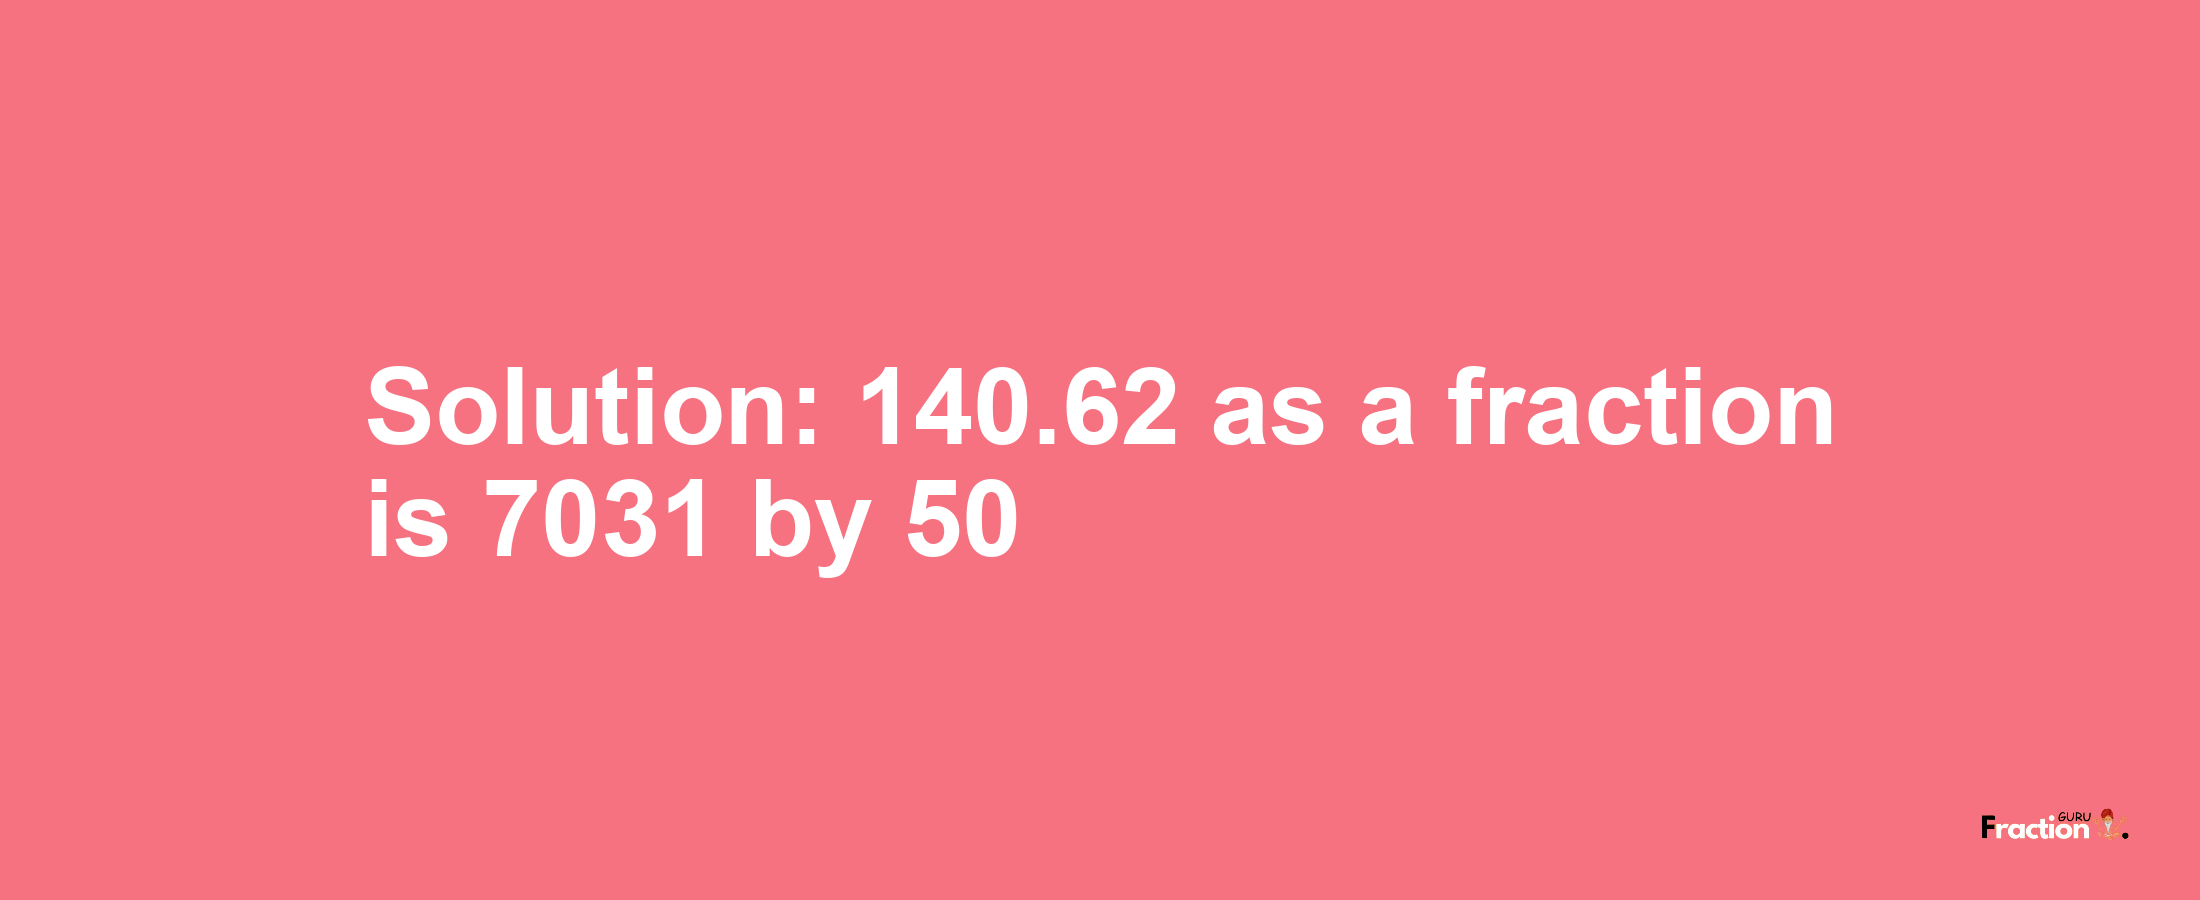 Solution:140.62 as a fraction is 7031/50